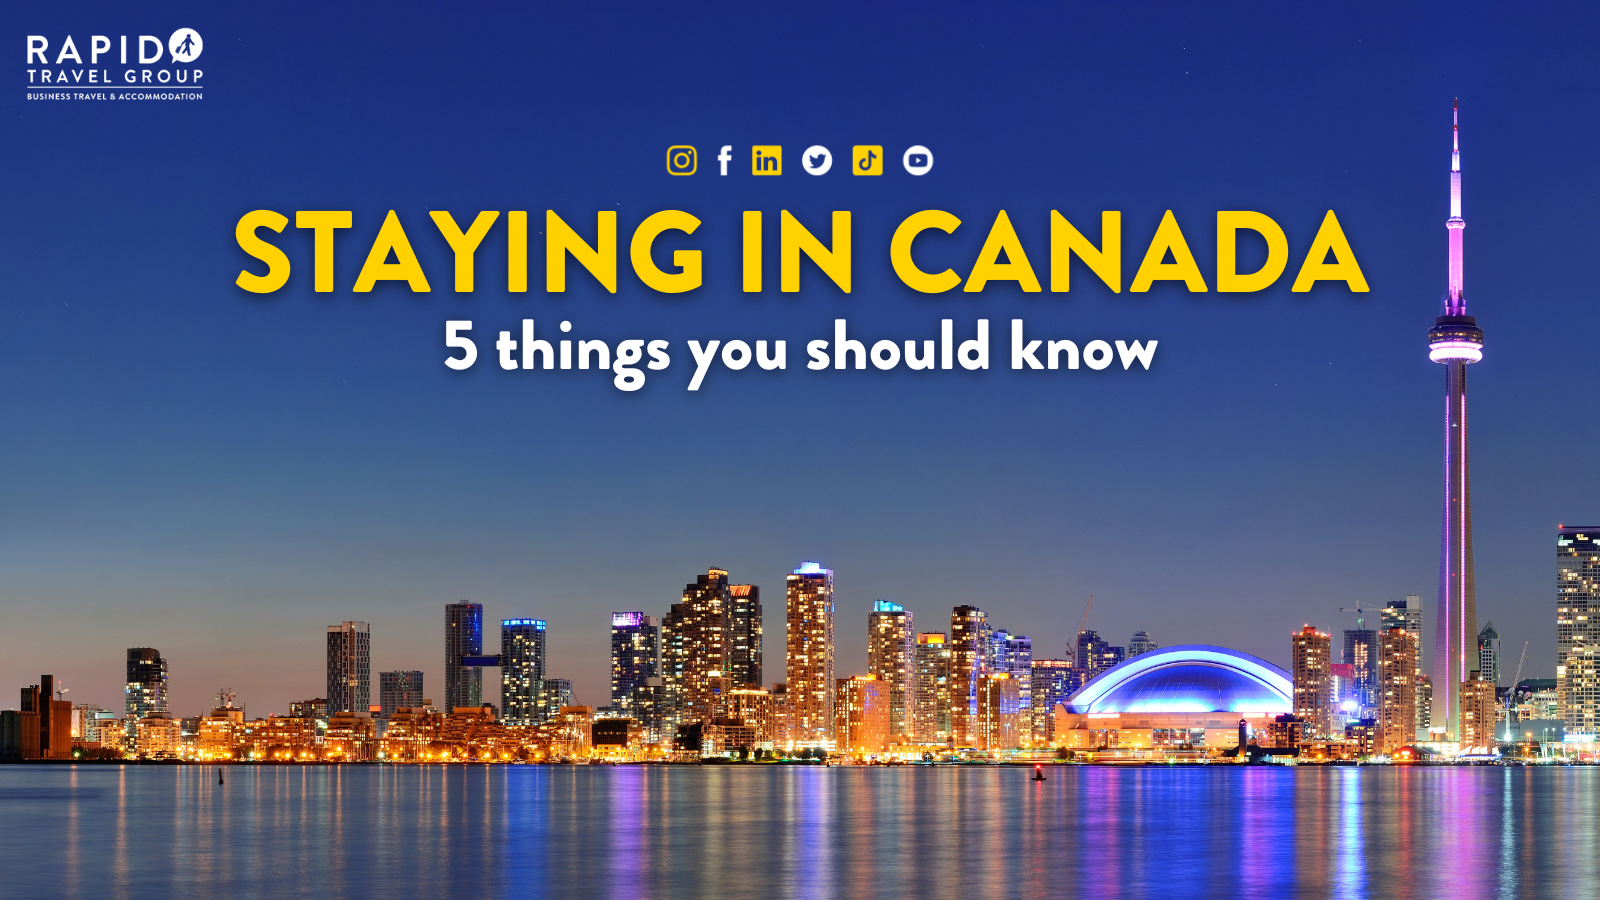 Staying in Canada: 5 things you should know with photo of Toronto, Canada